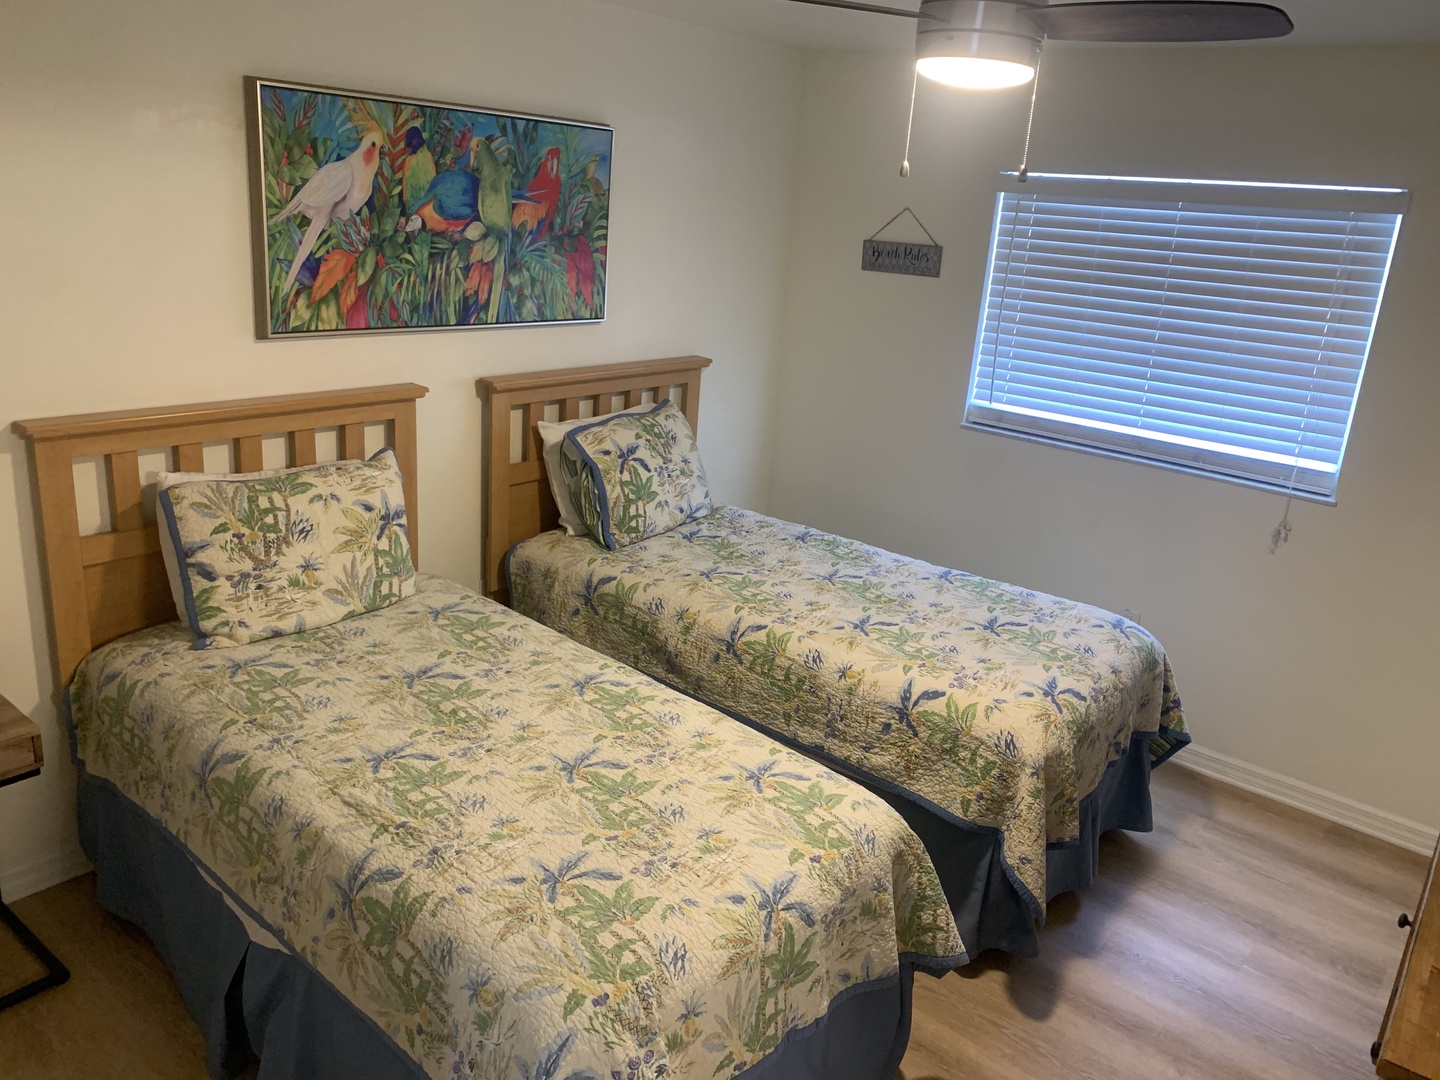 2nd bedroom: Twin beds, great for kids